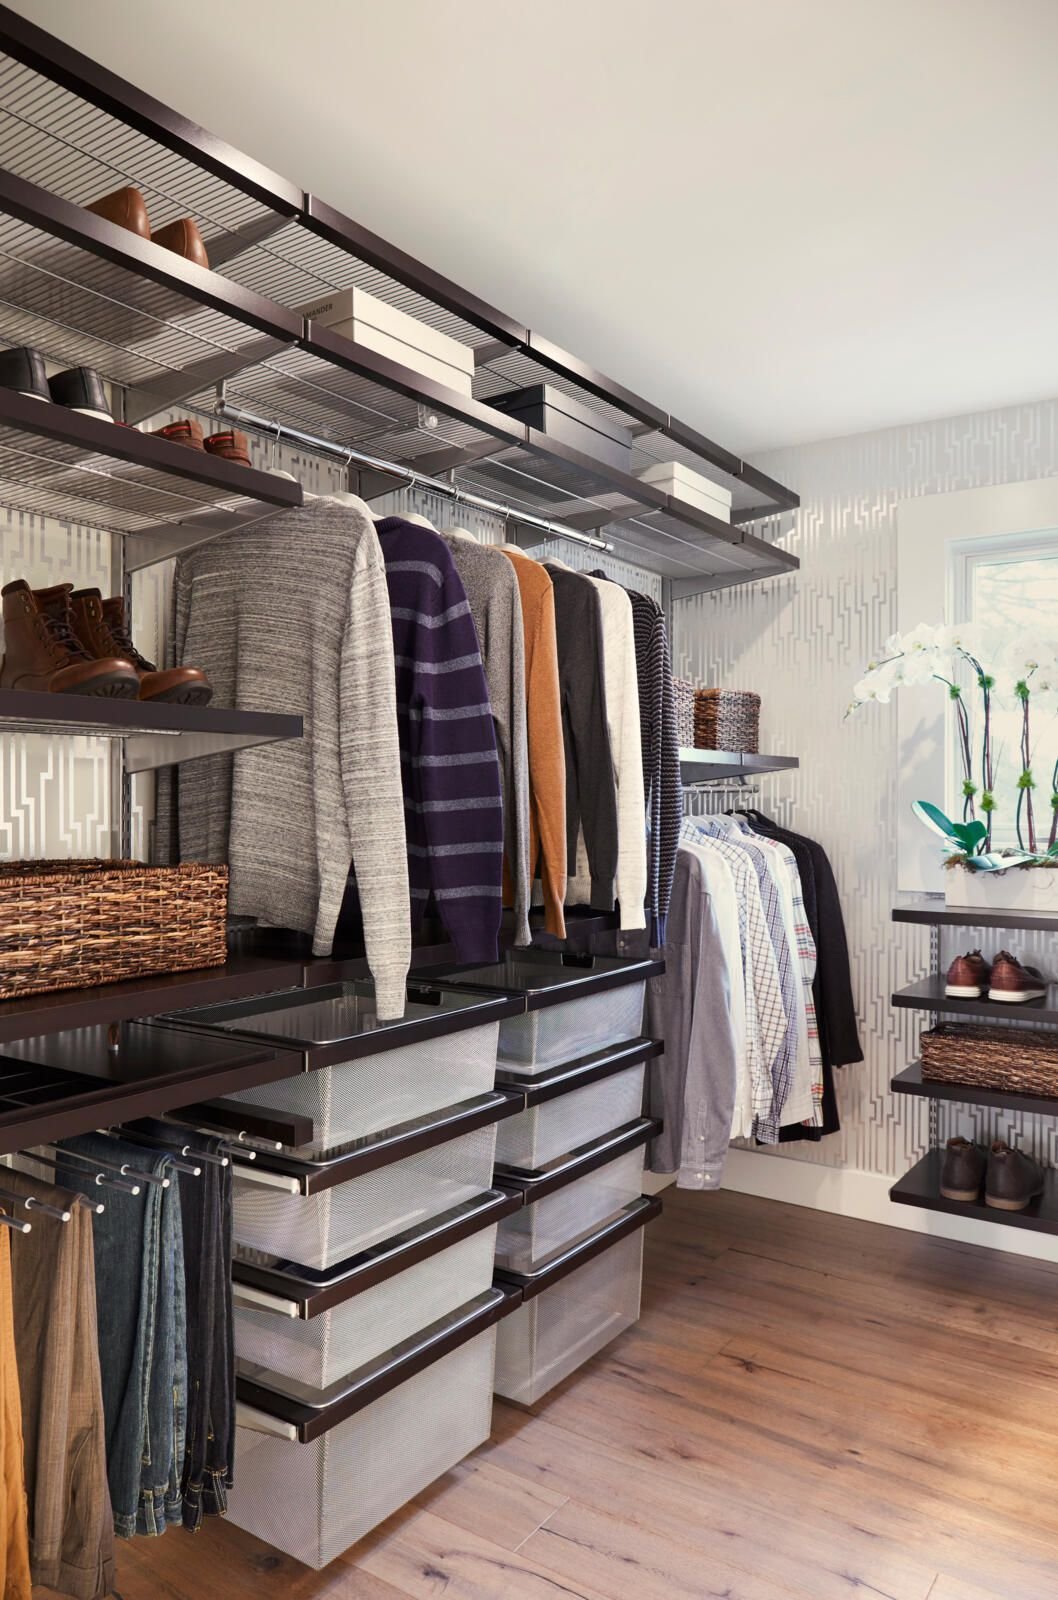 8 Essential Things to Declutter Before Winter, According to a Professional Organizer